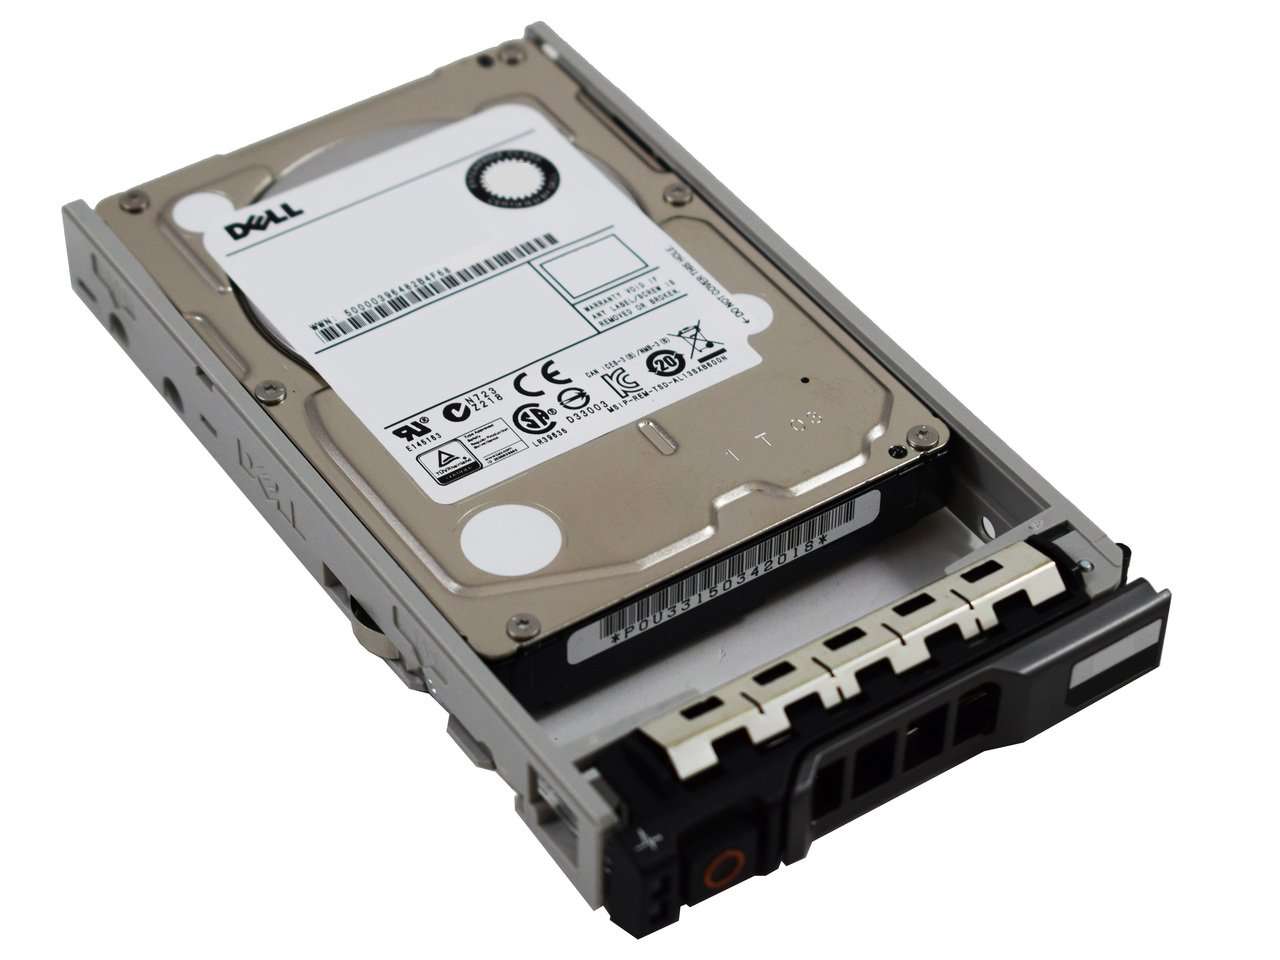 Dell G13 0HGJHG 600GB 10K RPM SAS 6Gb/s 512n 2.5" Manufacturer Recertified HDD